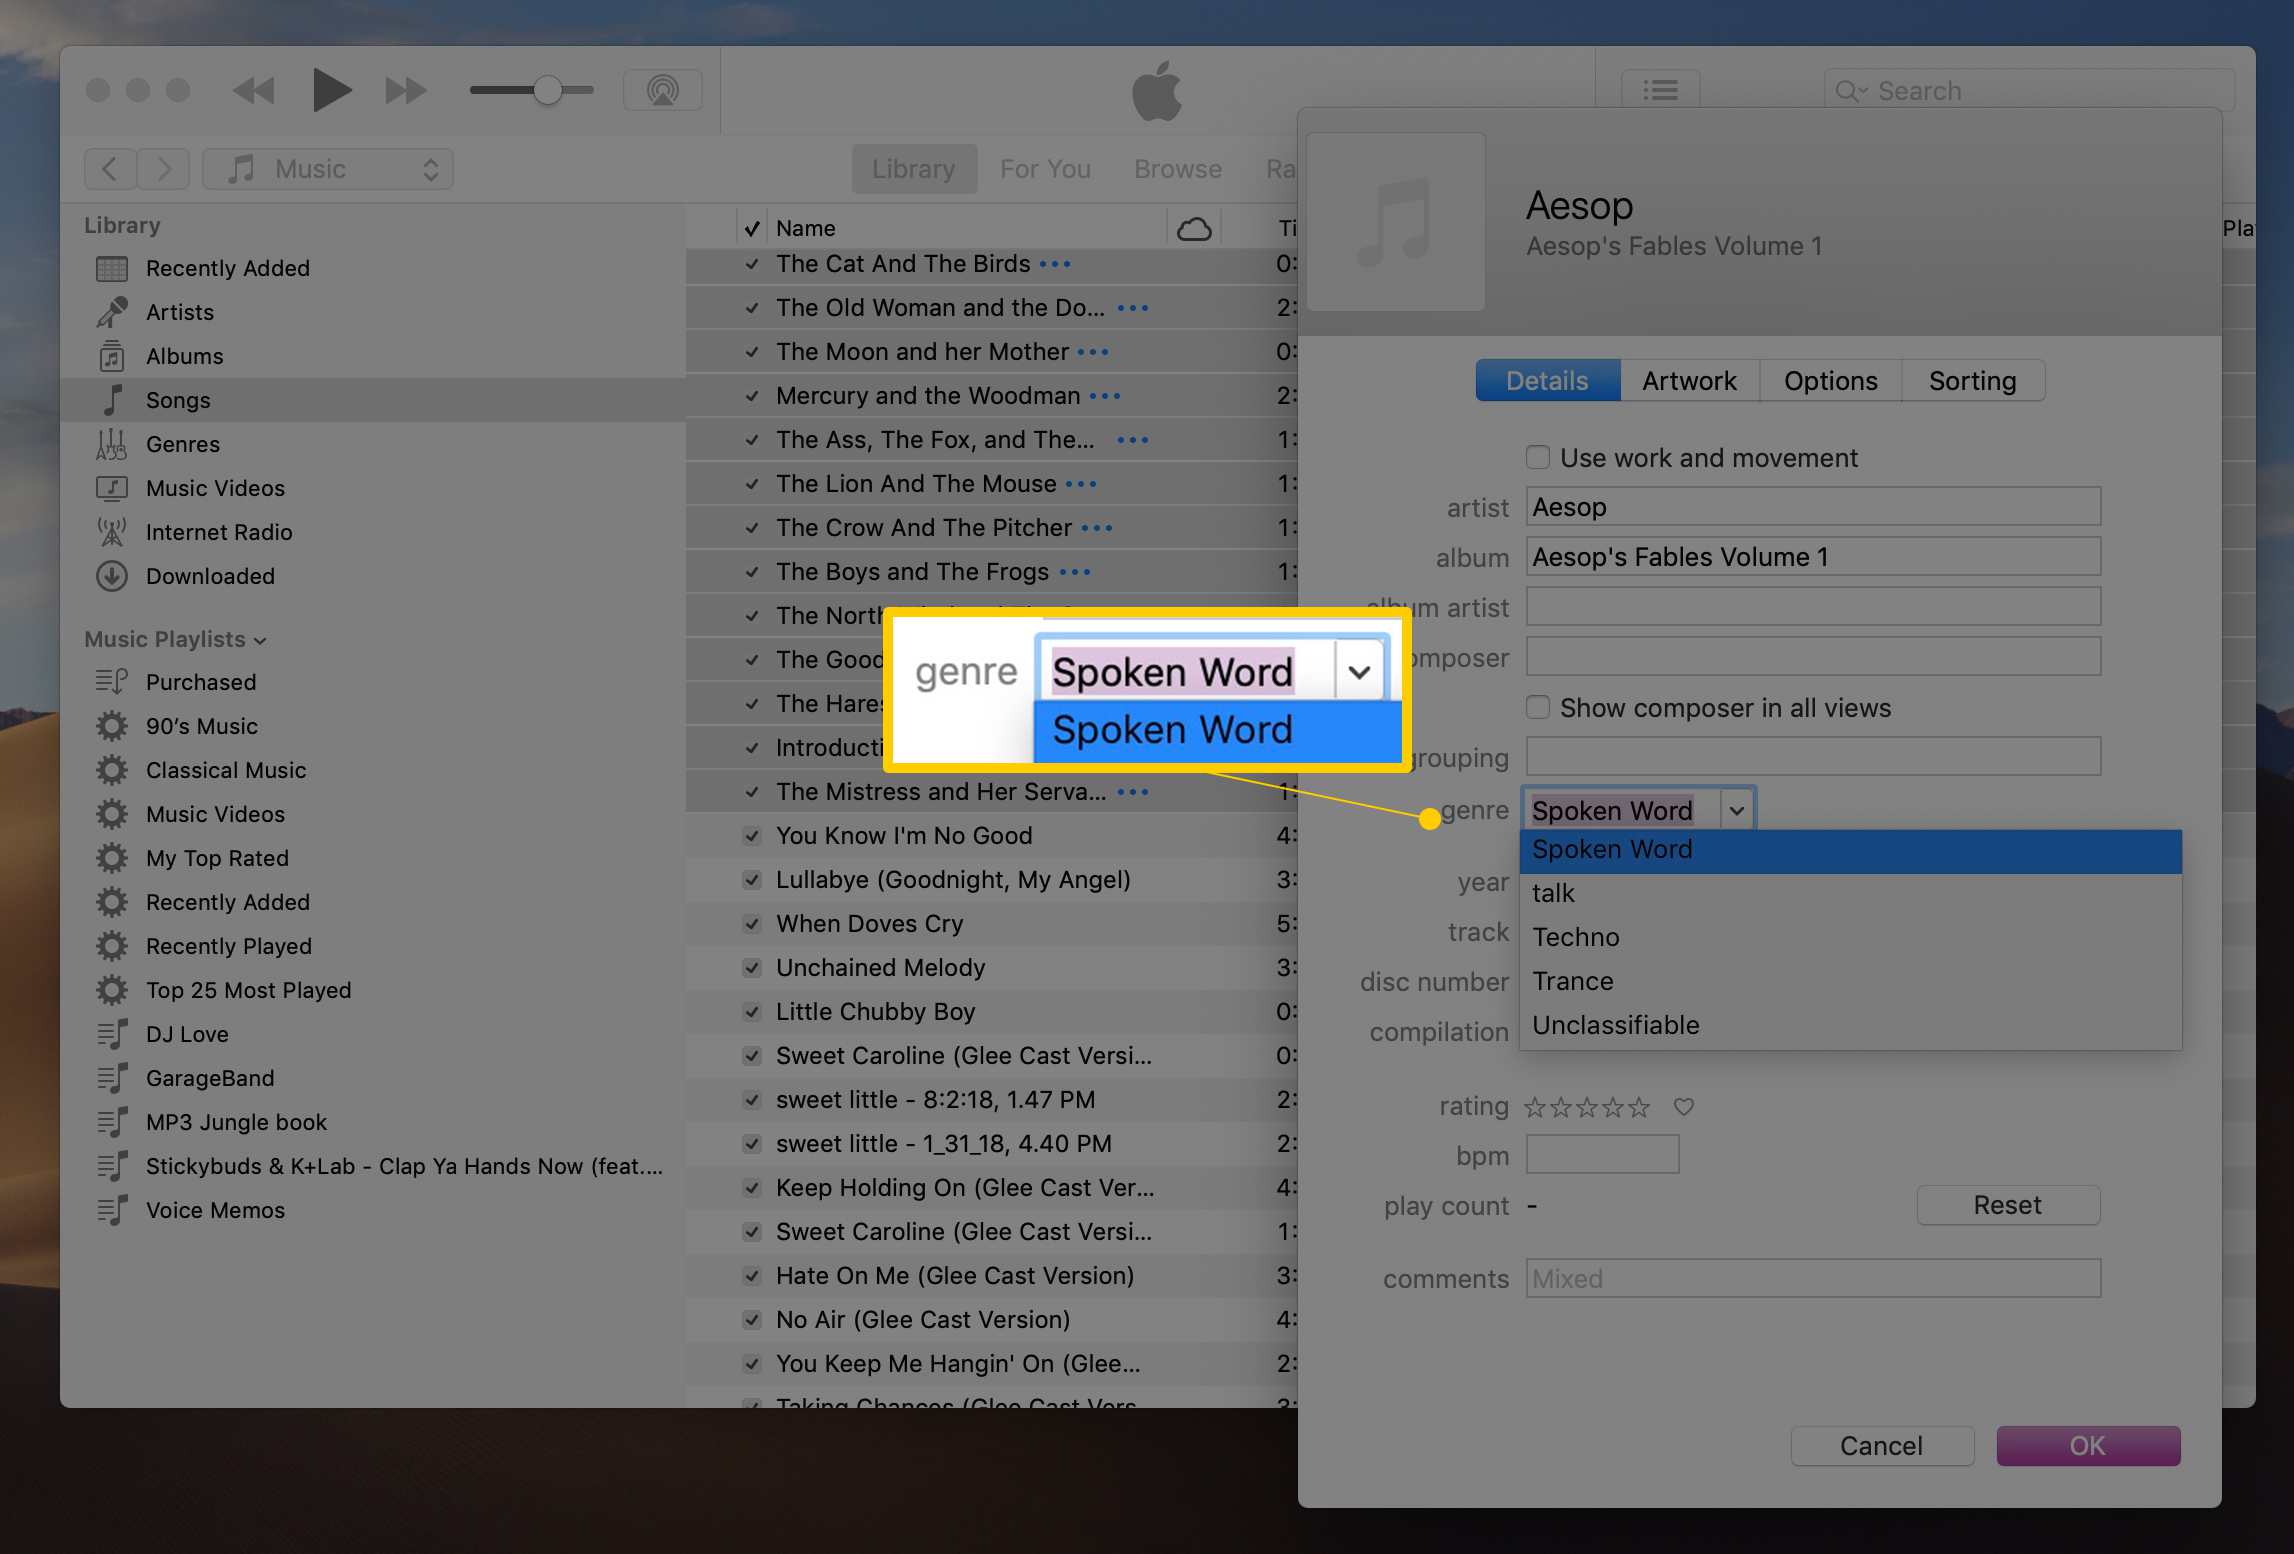 how to download music from mp3 converter to itunes